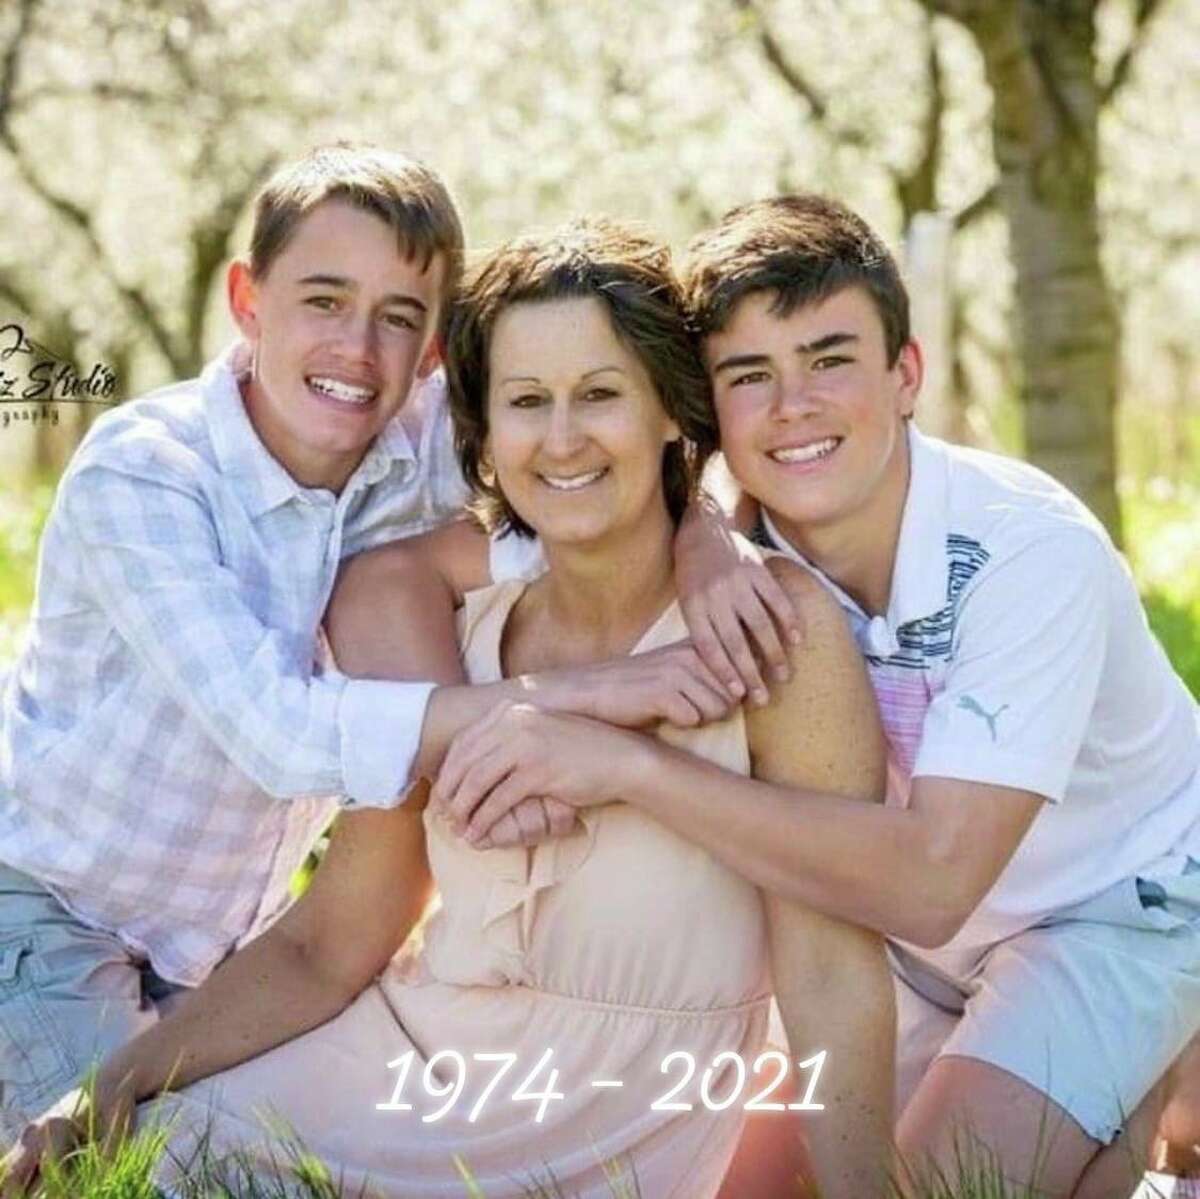 Jessica Scharp is shown with her sons, Jacob and Max Scharp. (Courtesy photo)